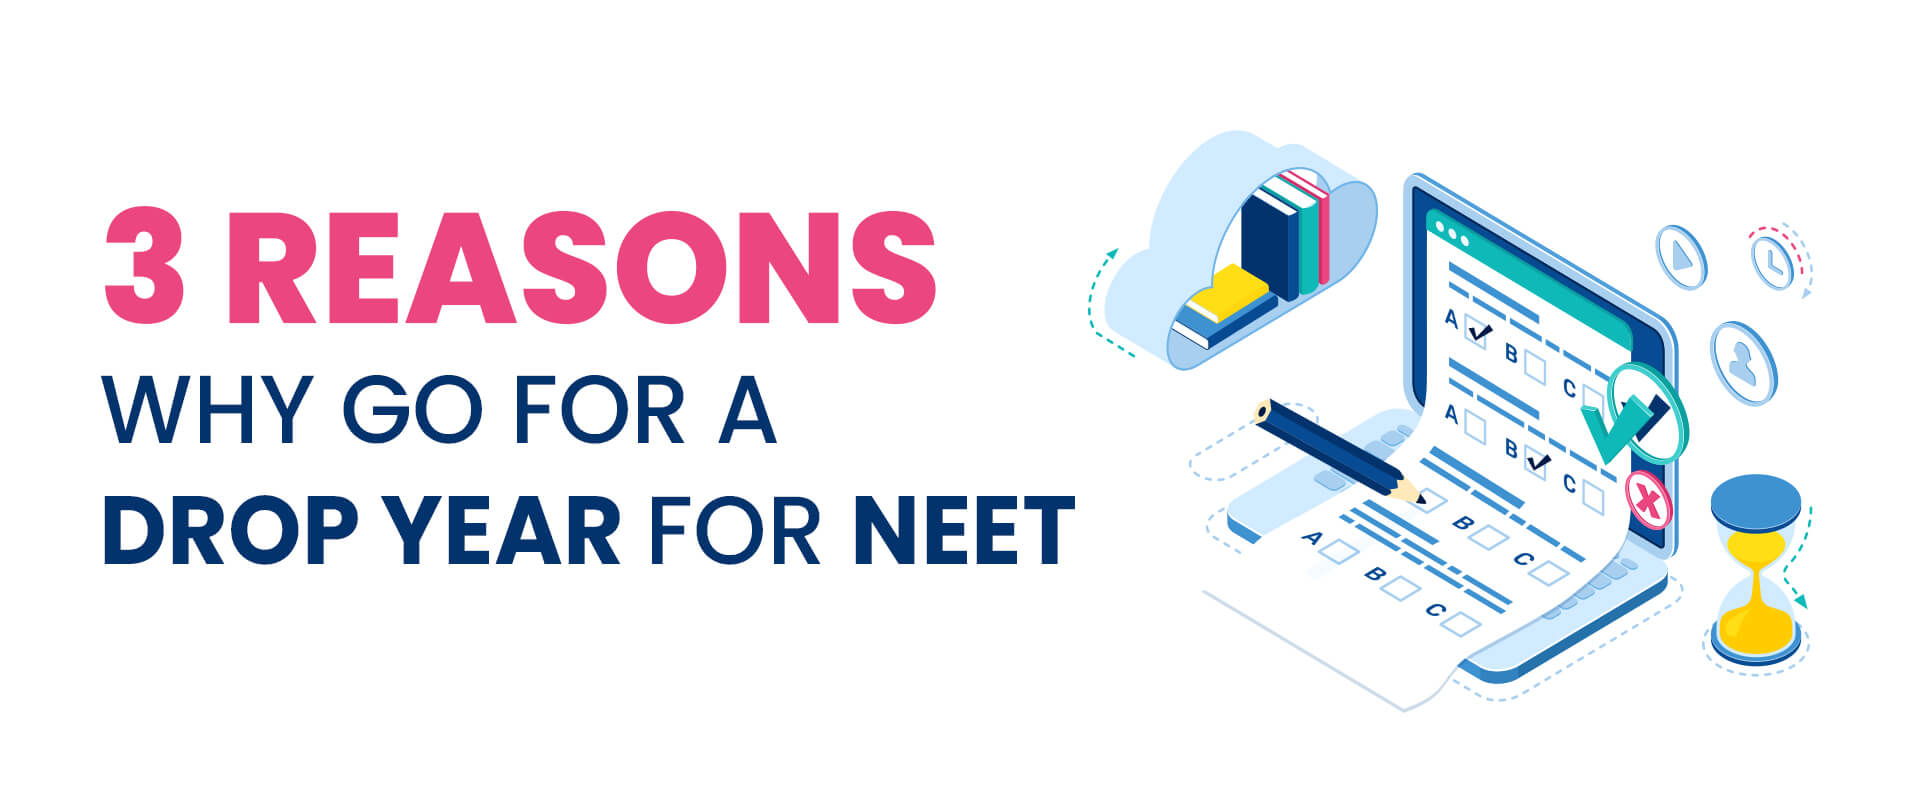 3 Reasons Why Go For A Drop Year For NEET